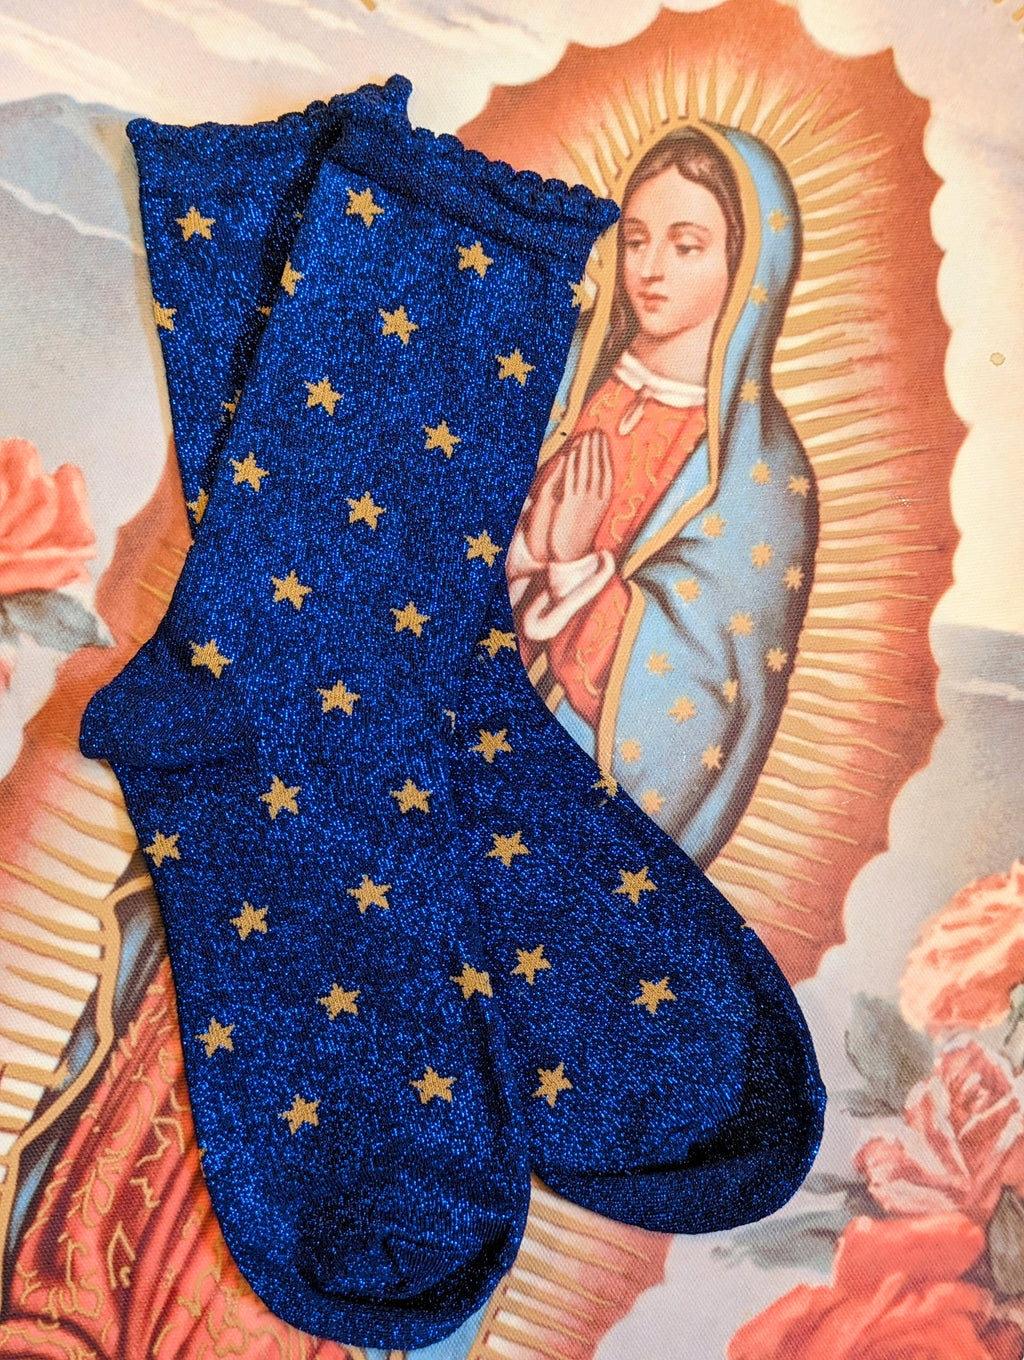 Gorgeous star strewn glitter socks, inspired by Guadalupe's cloak!

Scalloped glitter tops and deep blue with golden yellow stars.

Cotton 20% / Nylon 46% / Polyester 30% / Polyurethane 4%

Wash at 40.
Glitter socks
Stars

